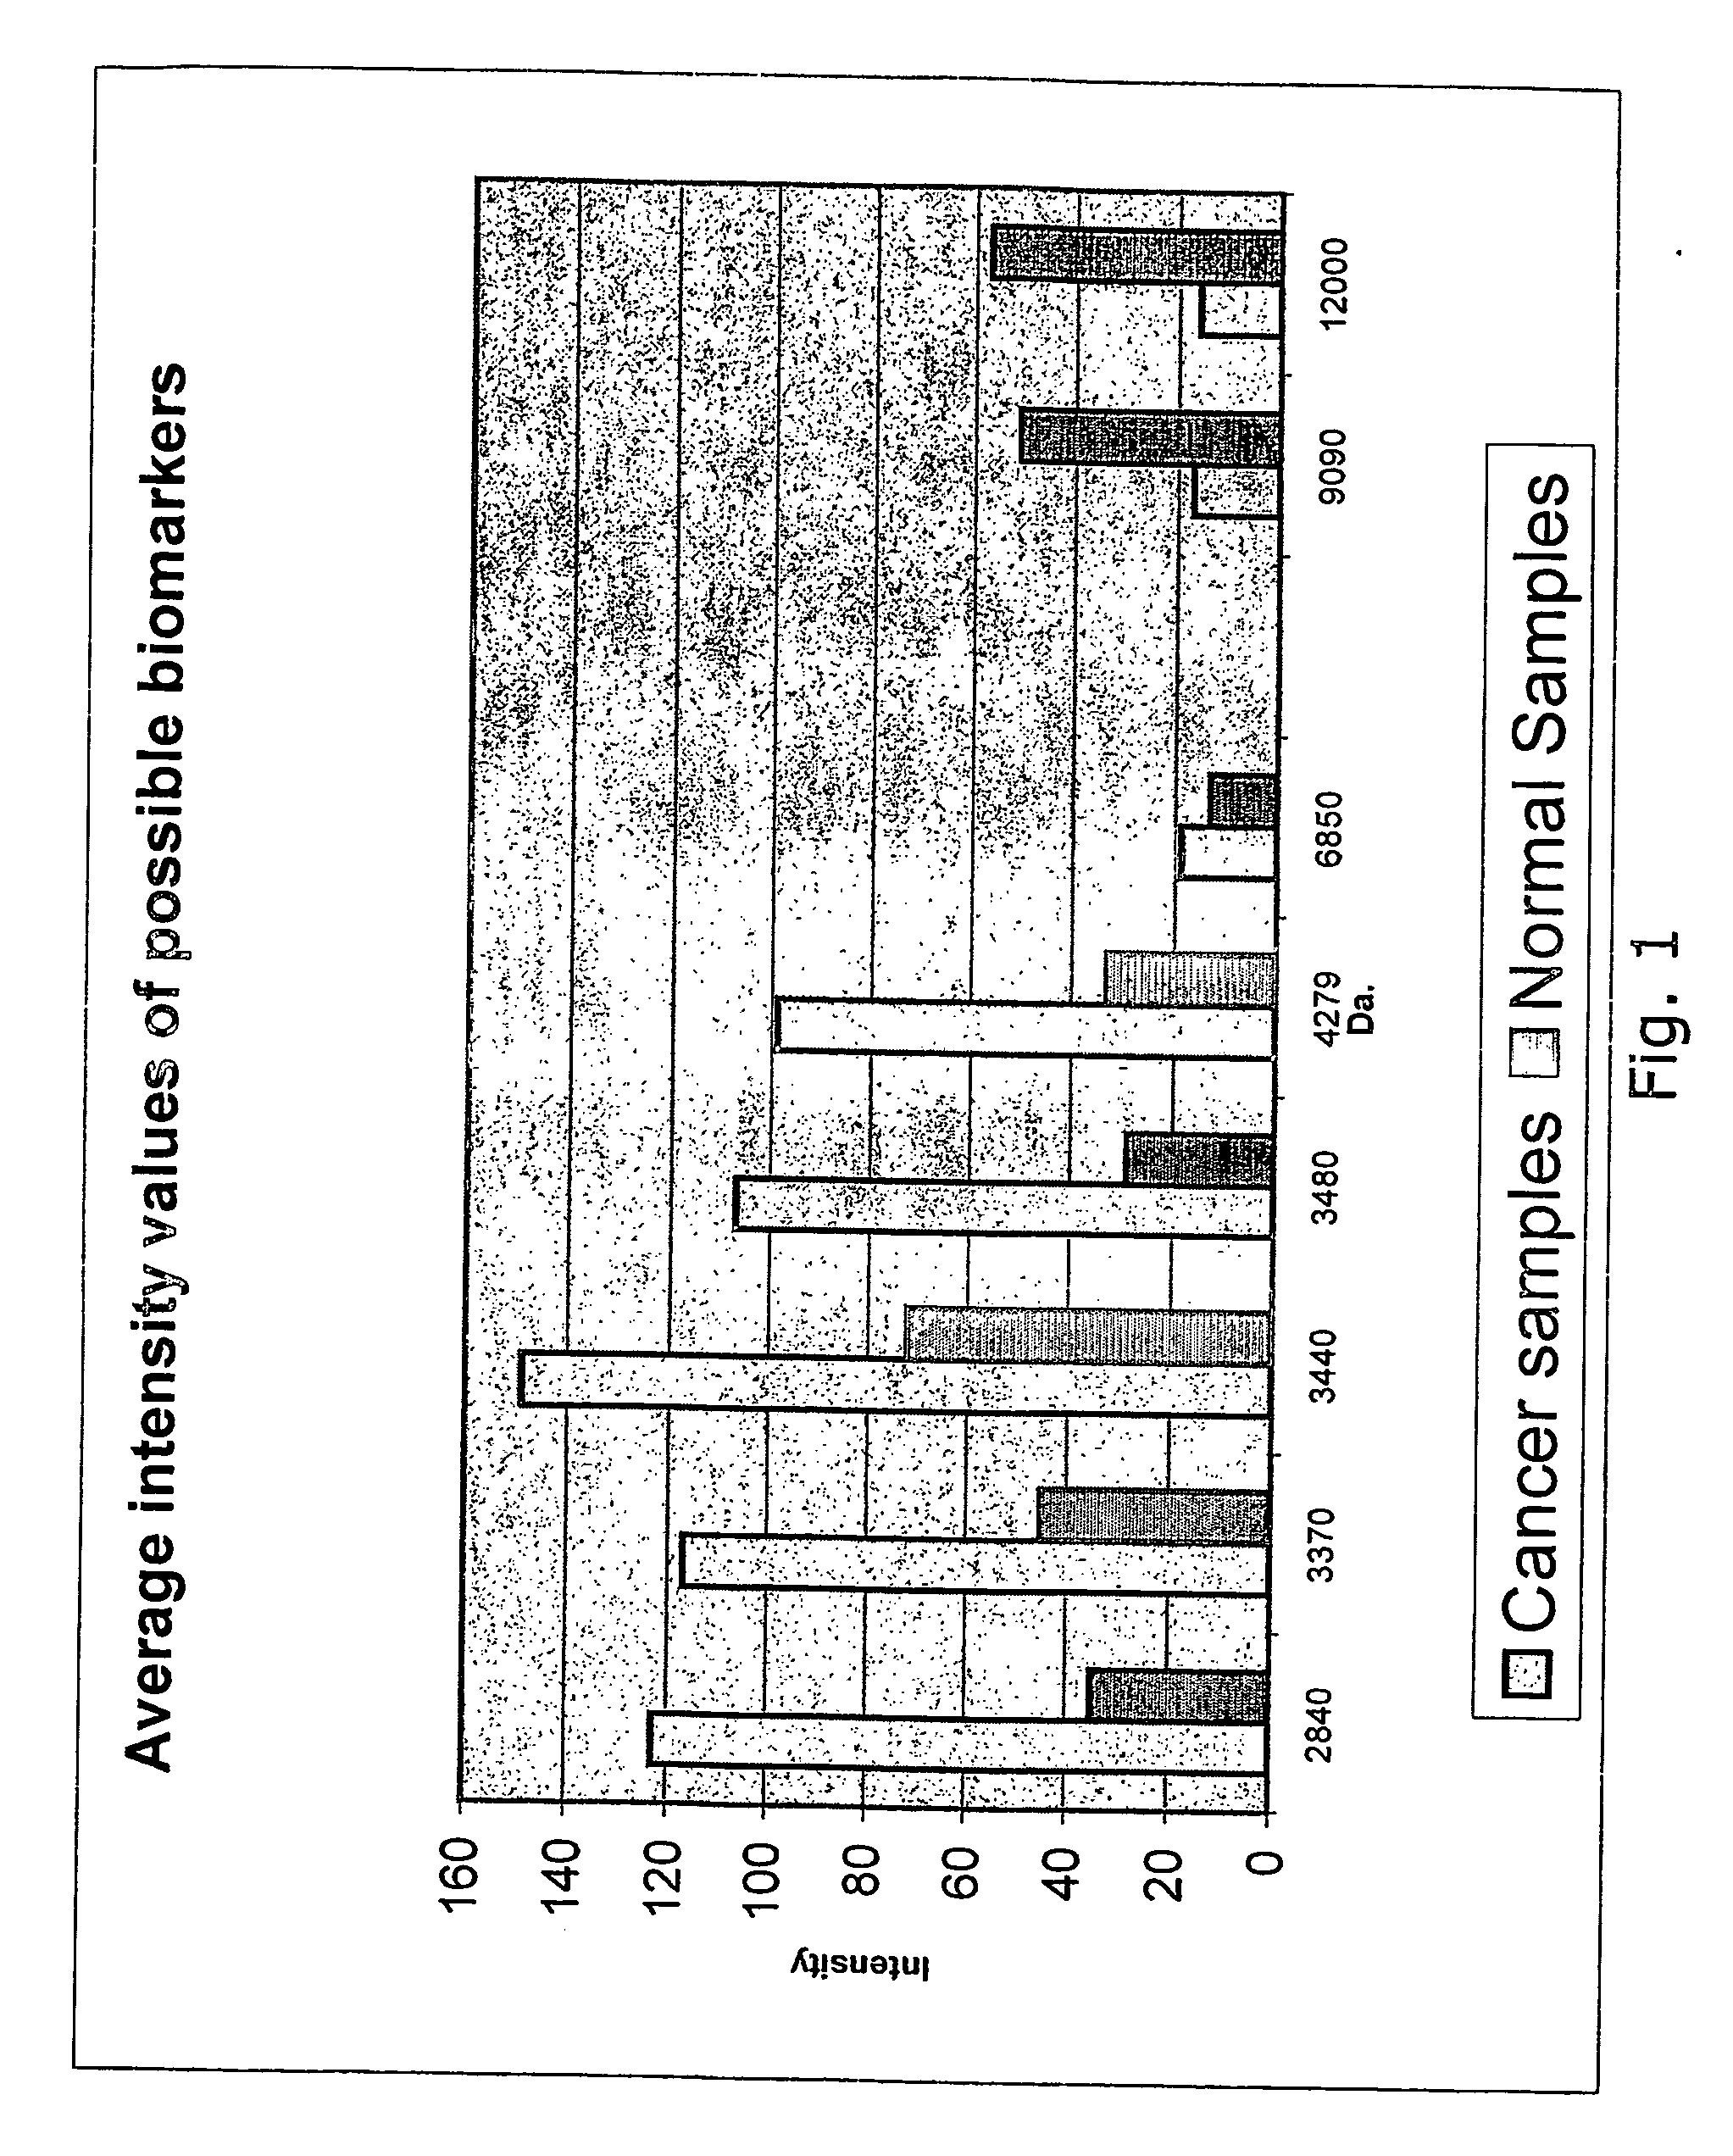 Method for detection of colorectal cancer in human samples